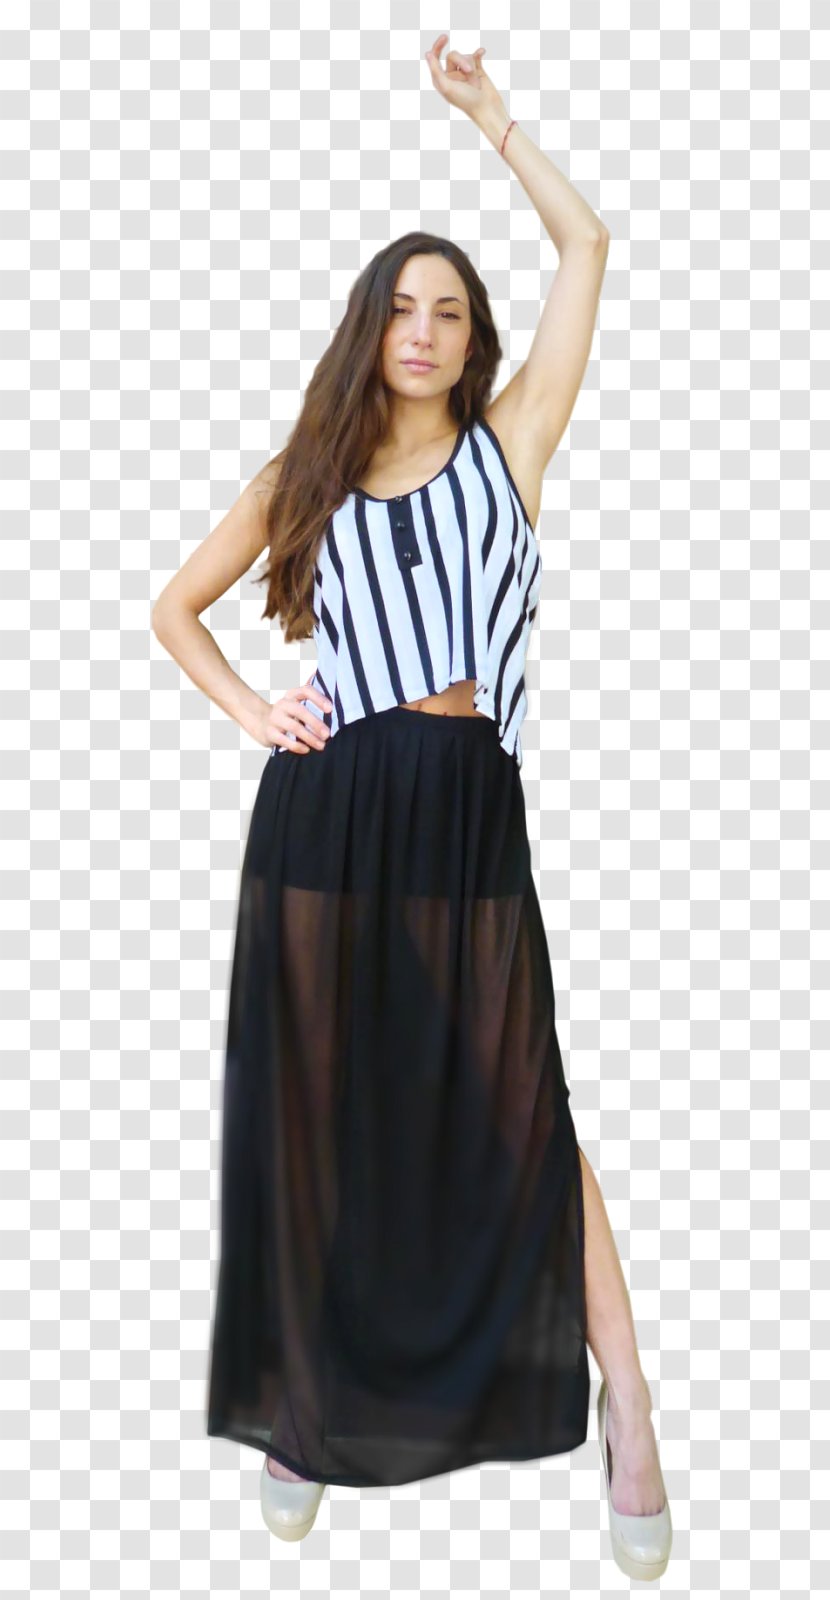 Cocktail Dress Skirt Clothing - Watercolor - Moda Transparent PNG